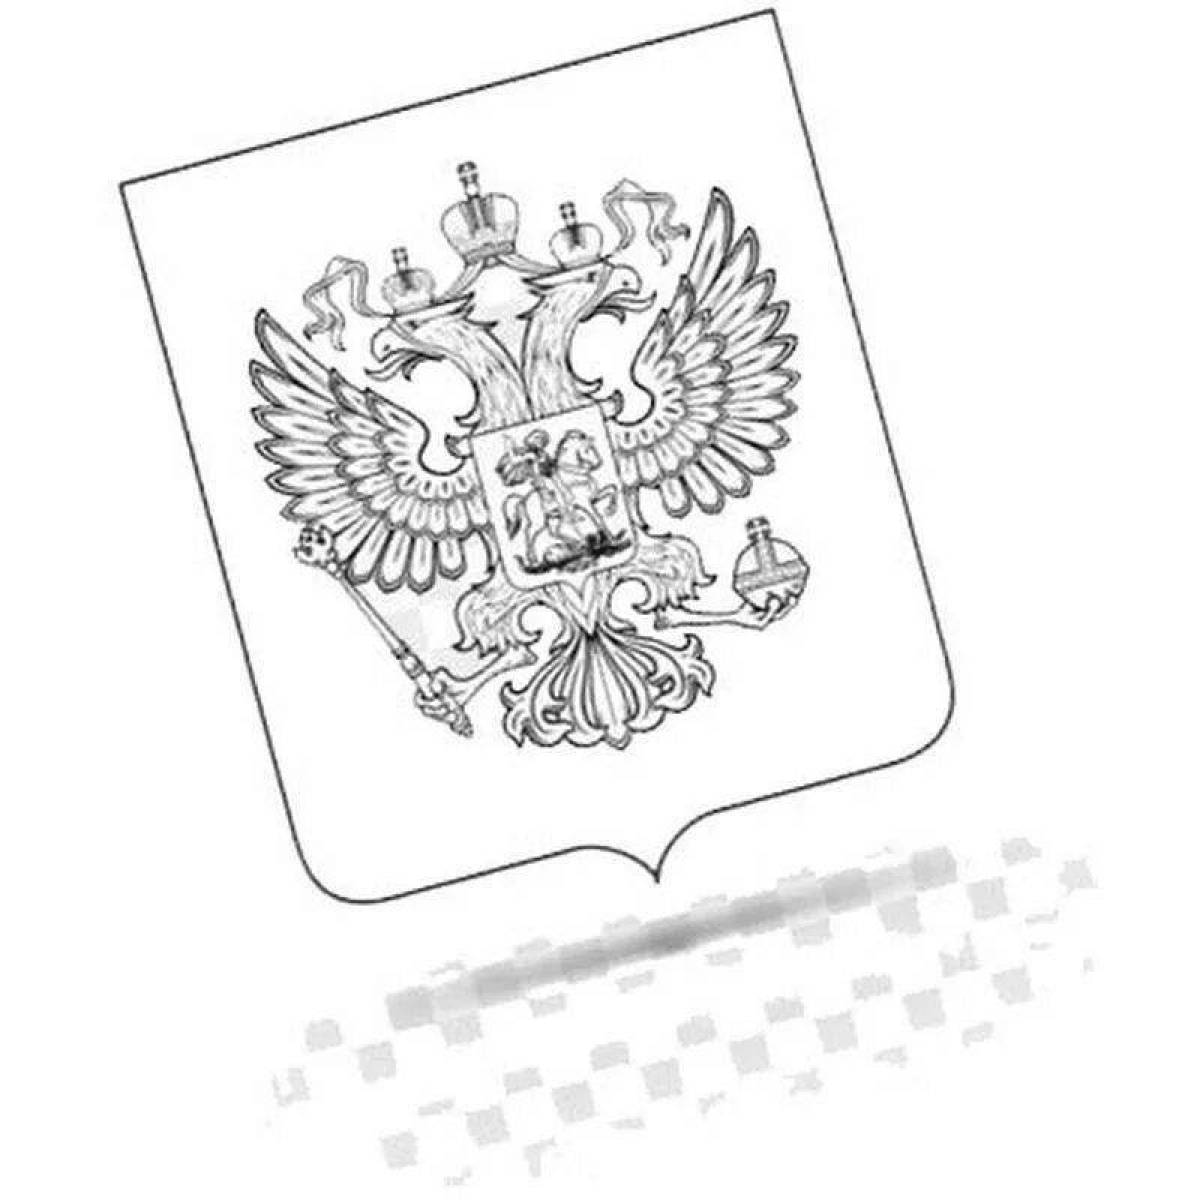 Bright flag and coat of arms of Russia